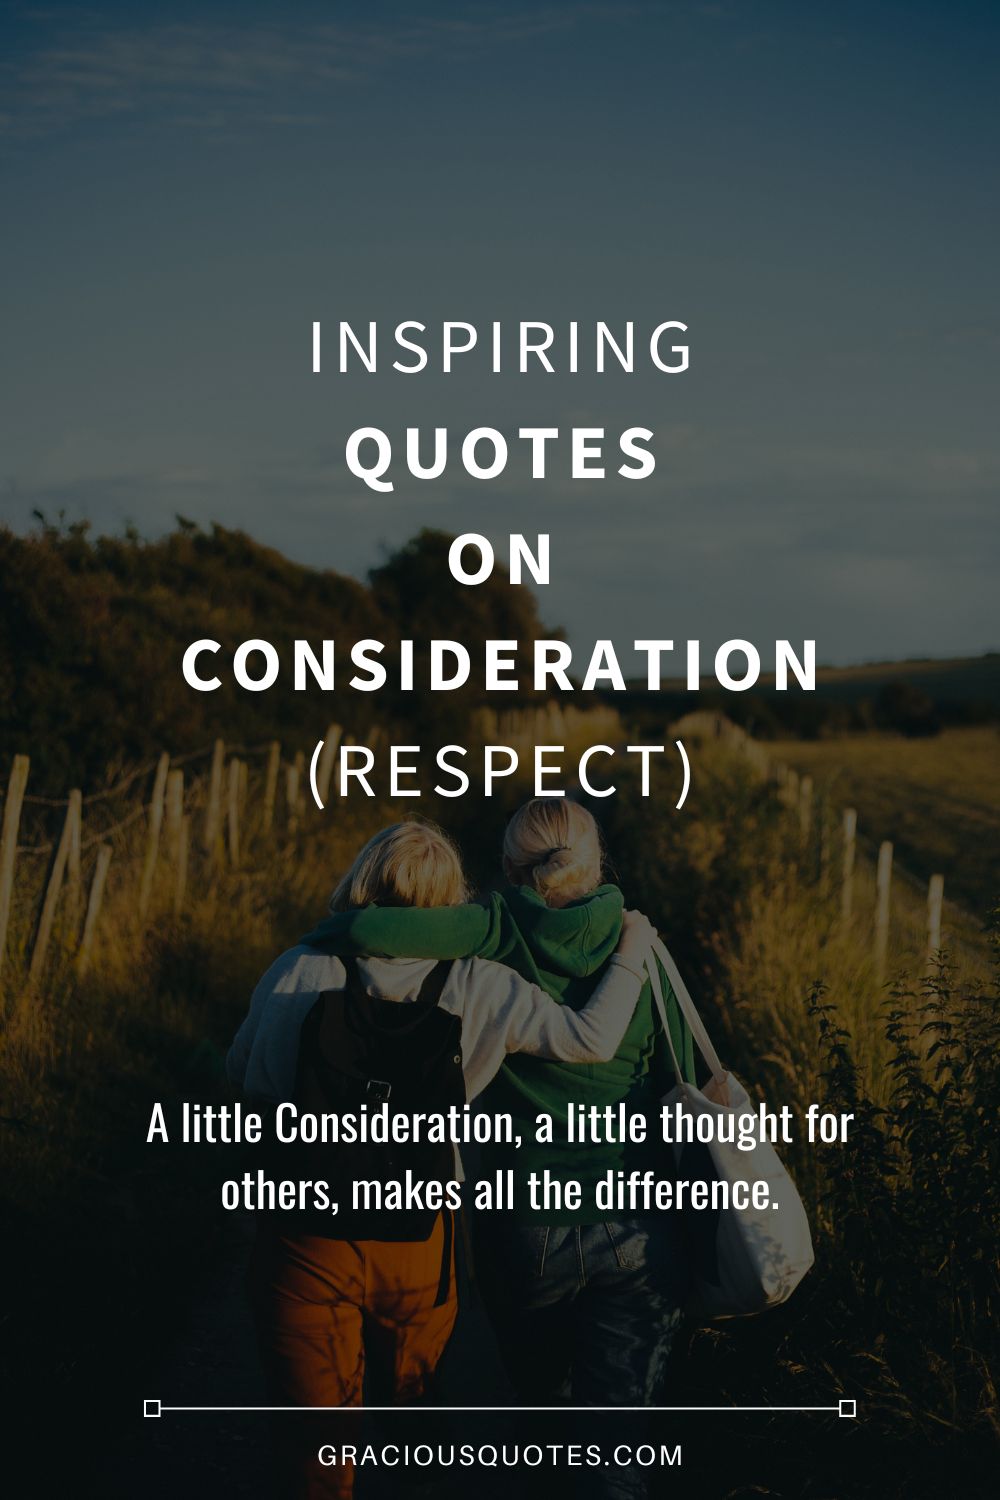 Inspiring Quotes on Consideration (RESPECT) - Gracious Quotes